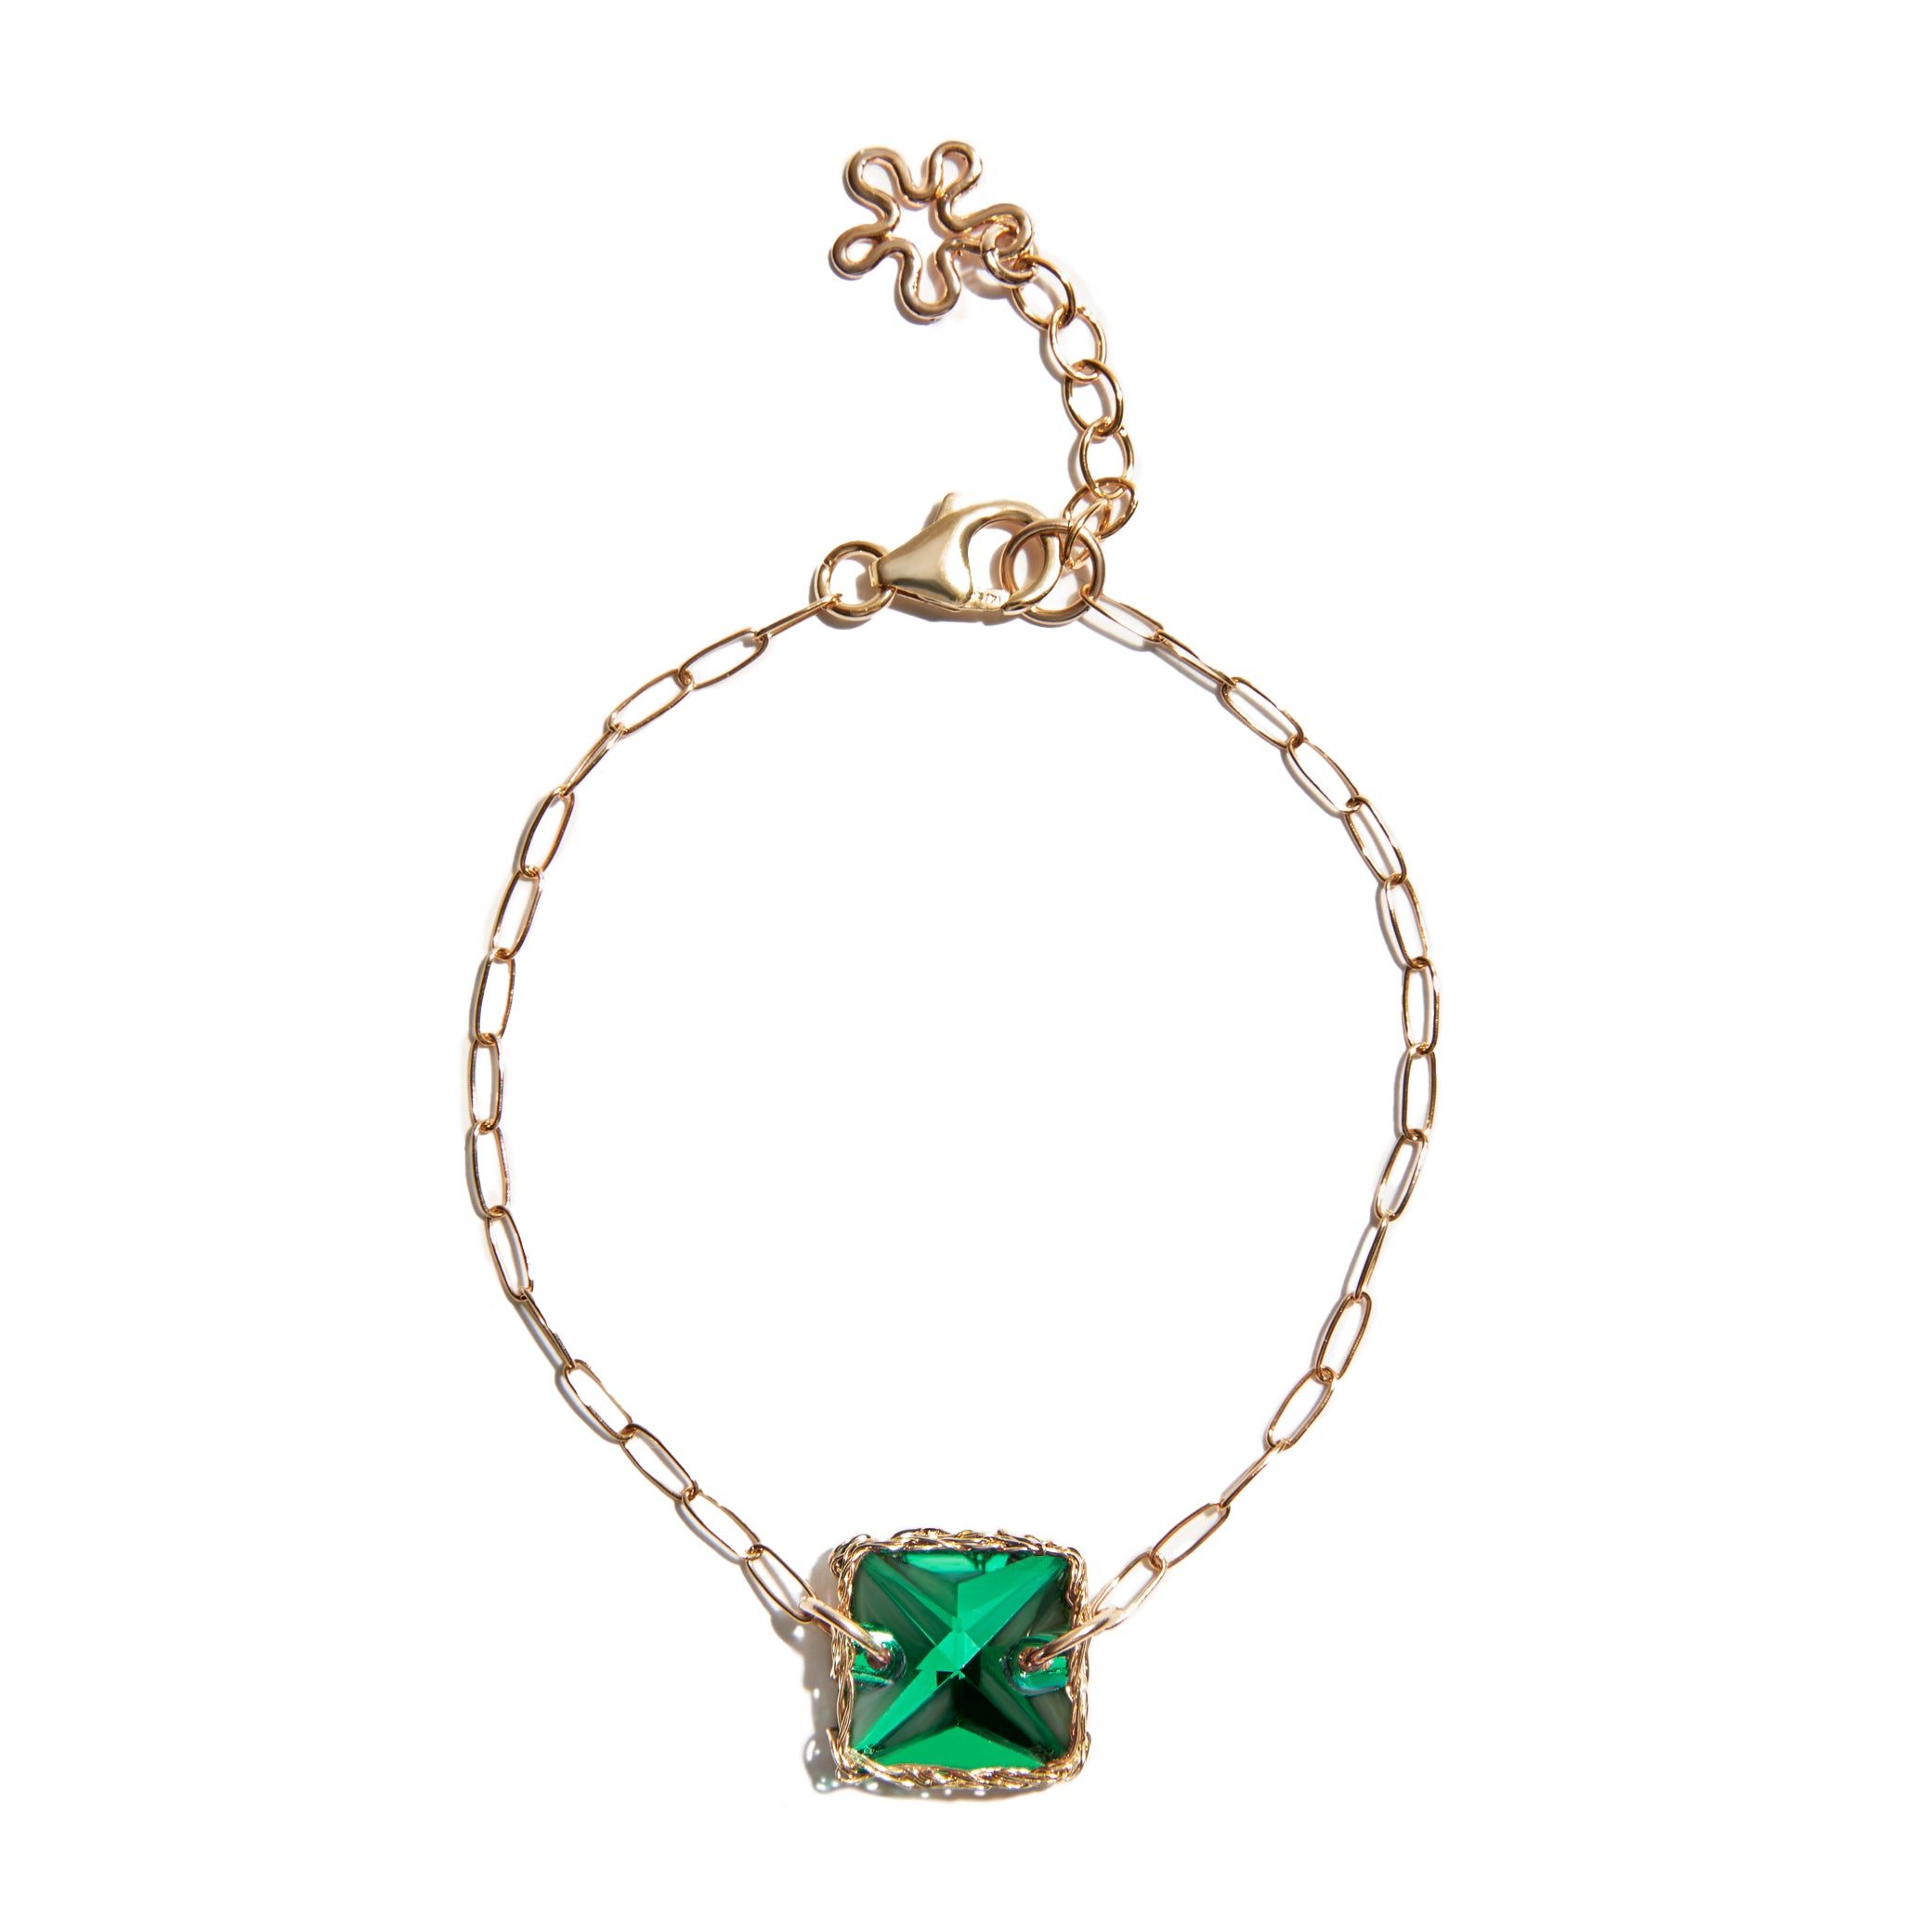 Our Emerald Green Gem Bracelet crochet bracelet is made from 14ct gold fill. The perfect gift for someone special.